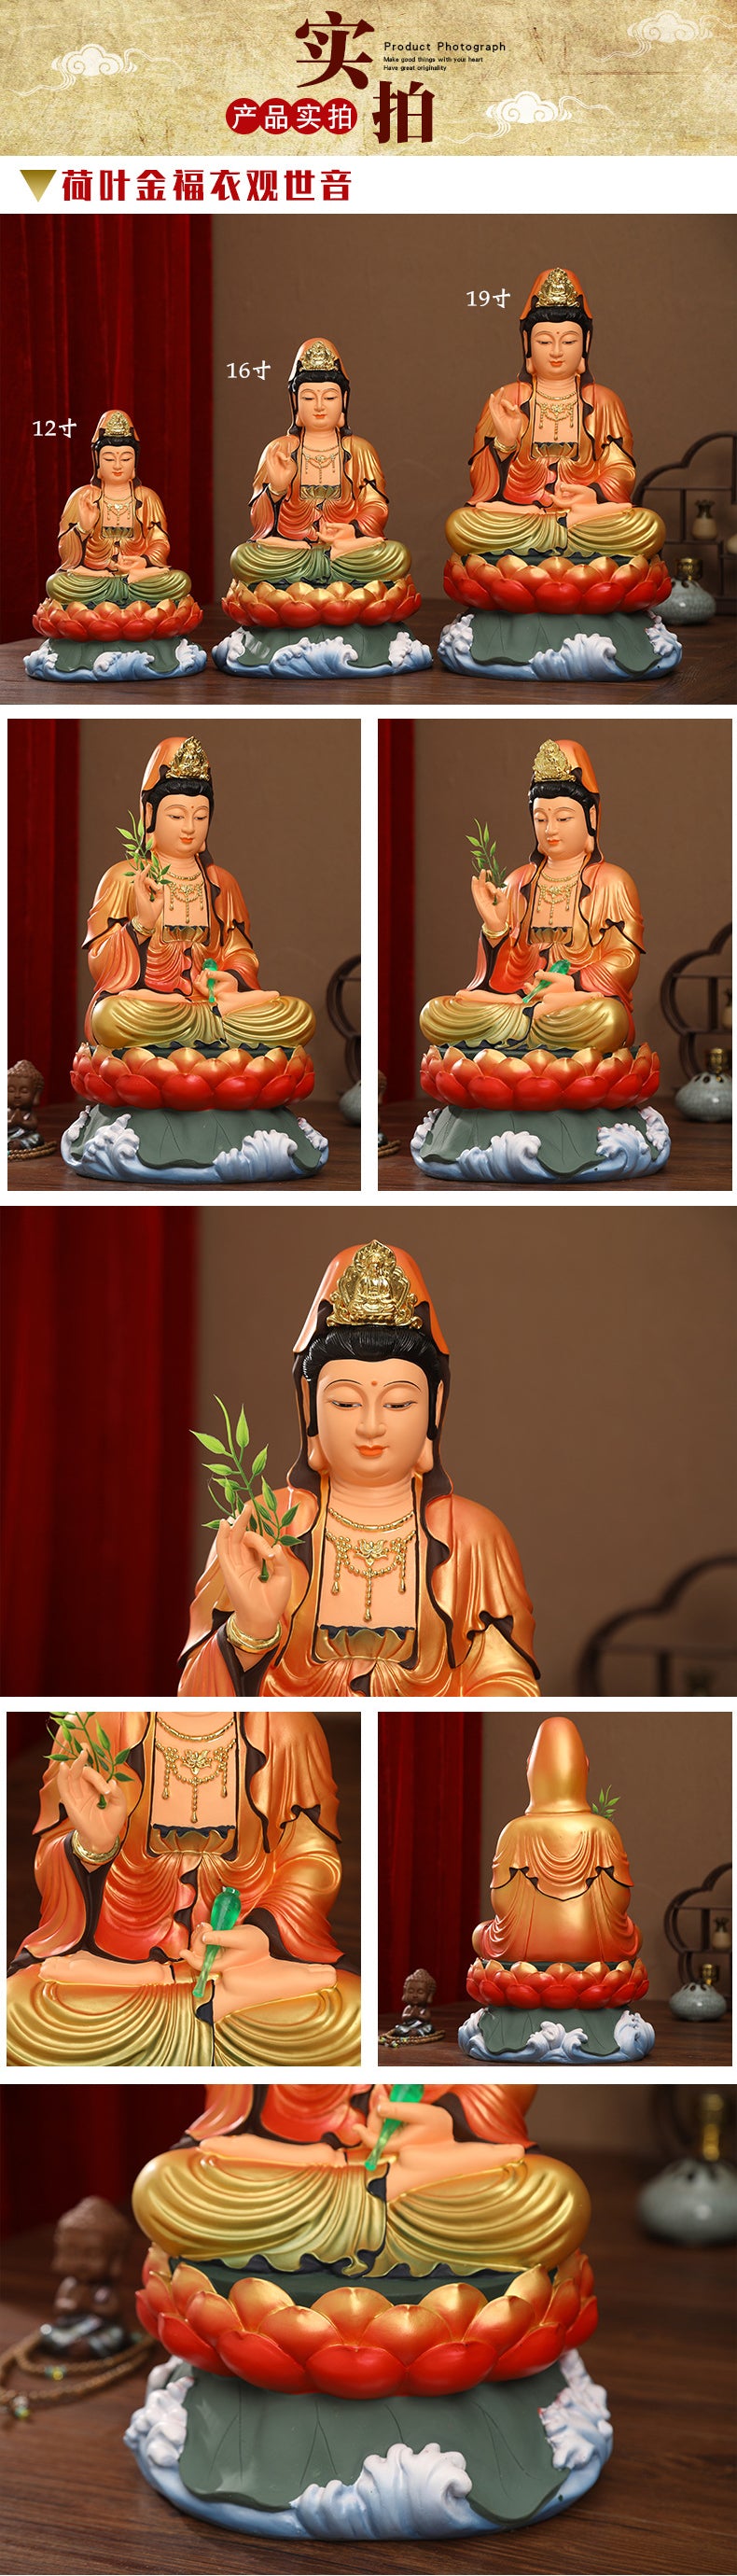 Resin Fiberglass Material of the South China Sea Lotus Leaves Golden Blessing Cloth Guanyin Statue Details 2